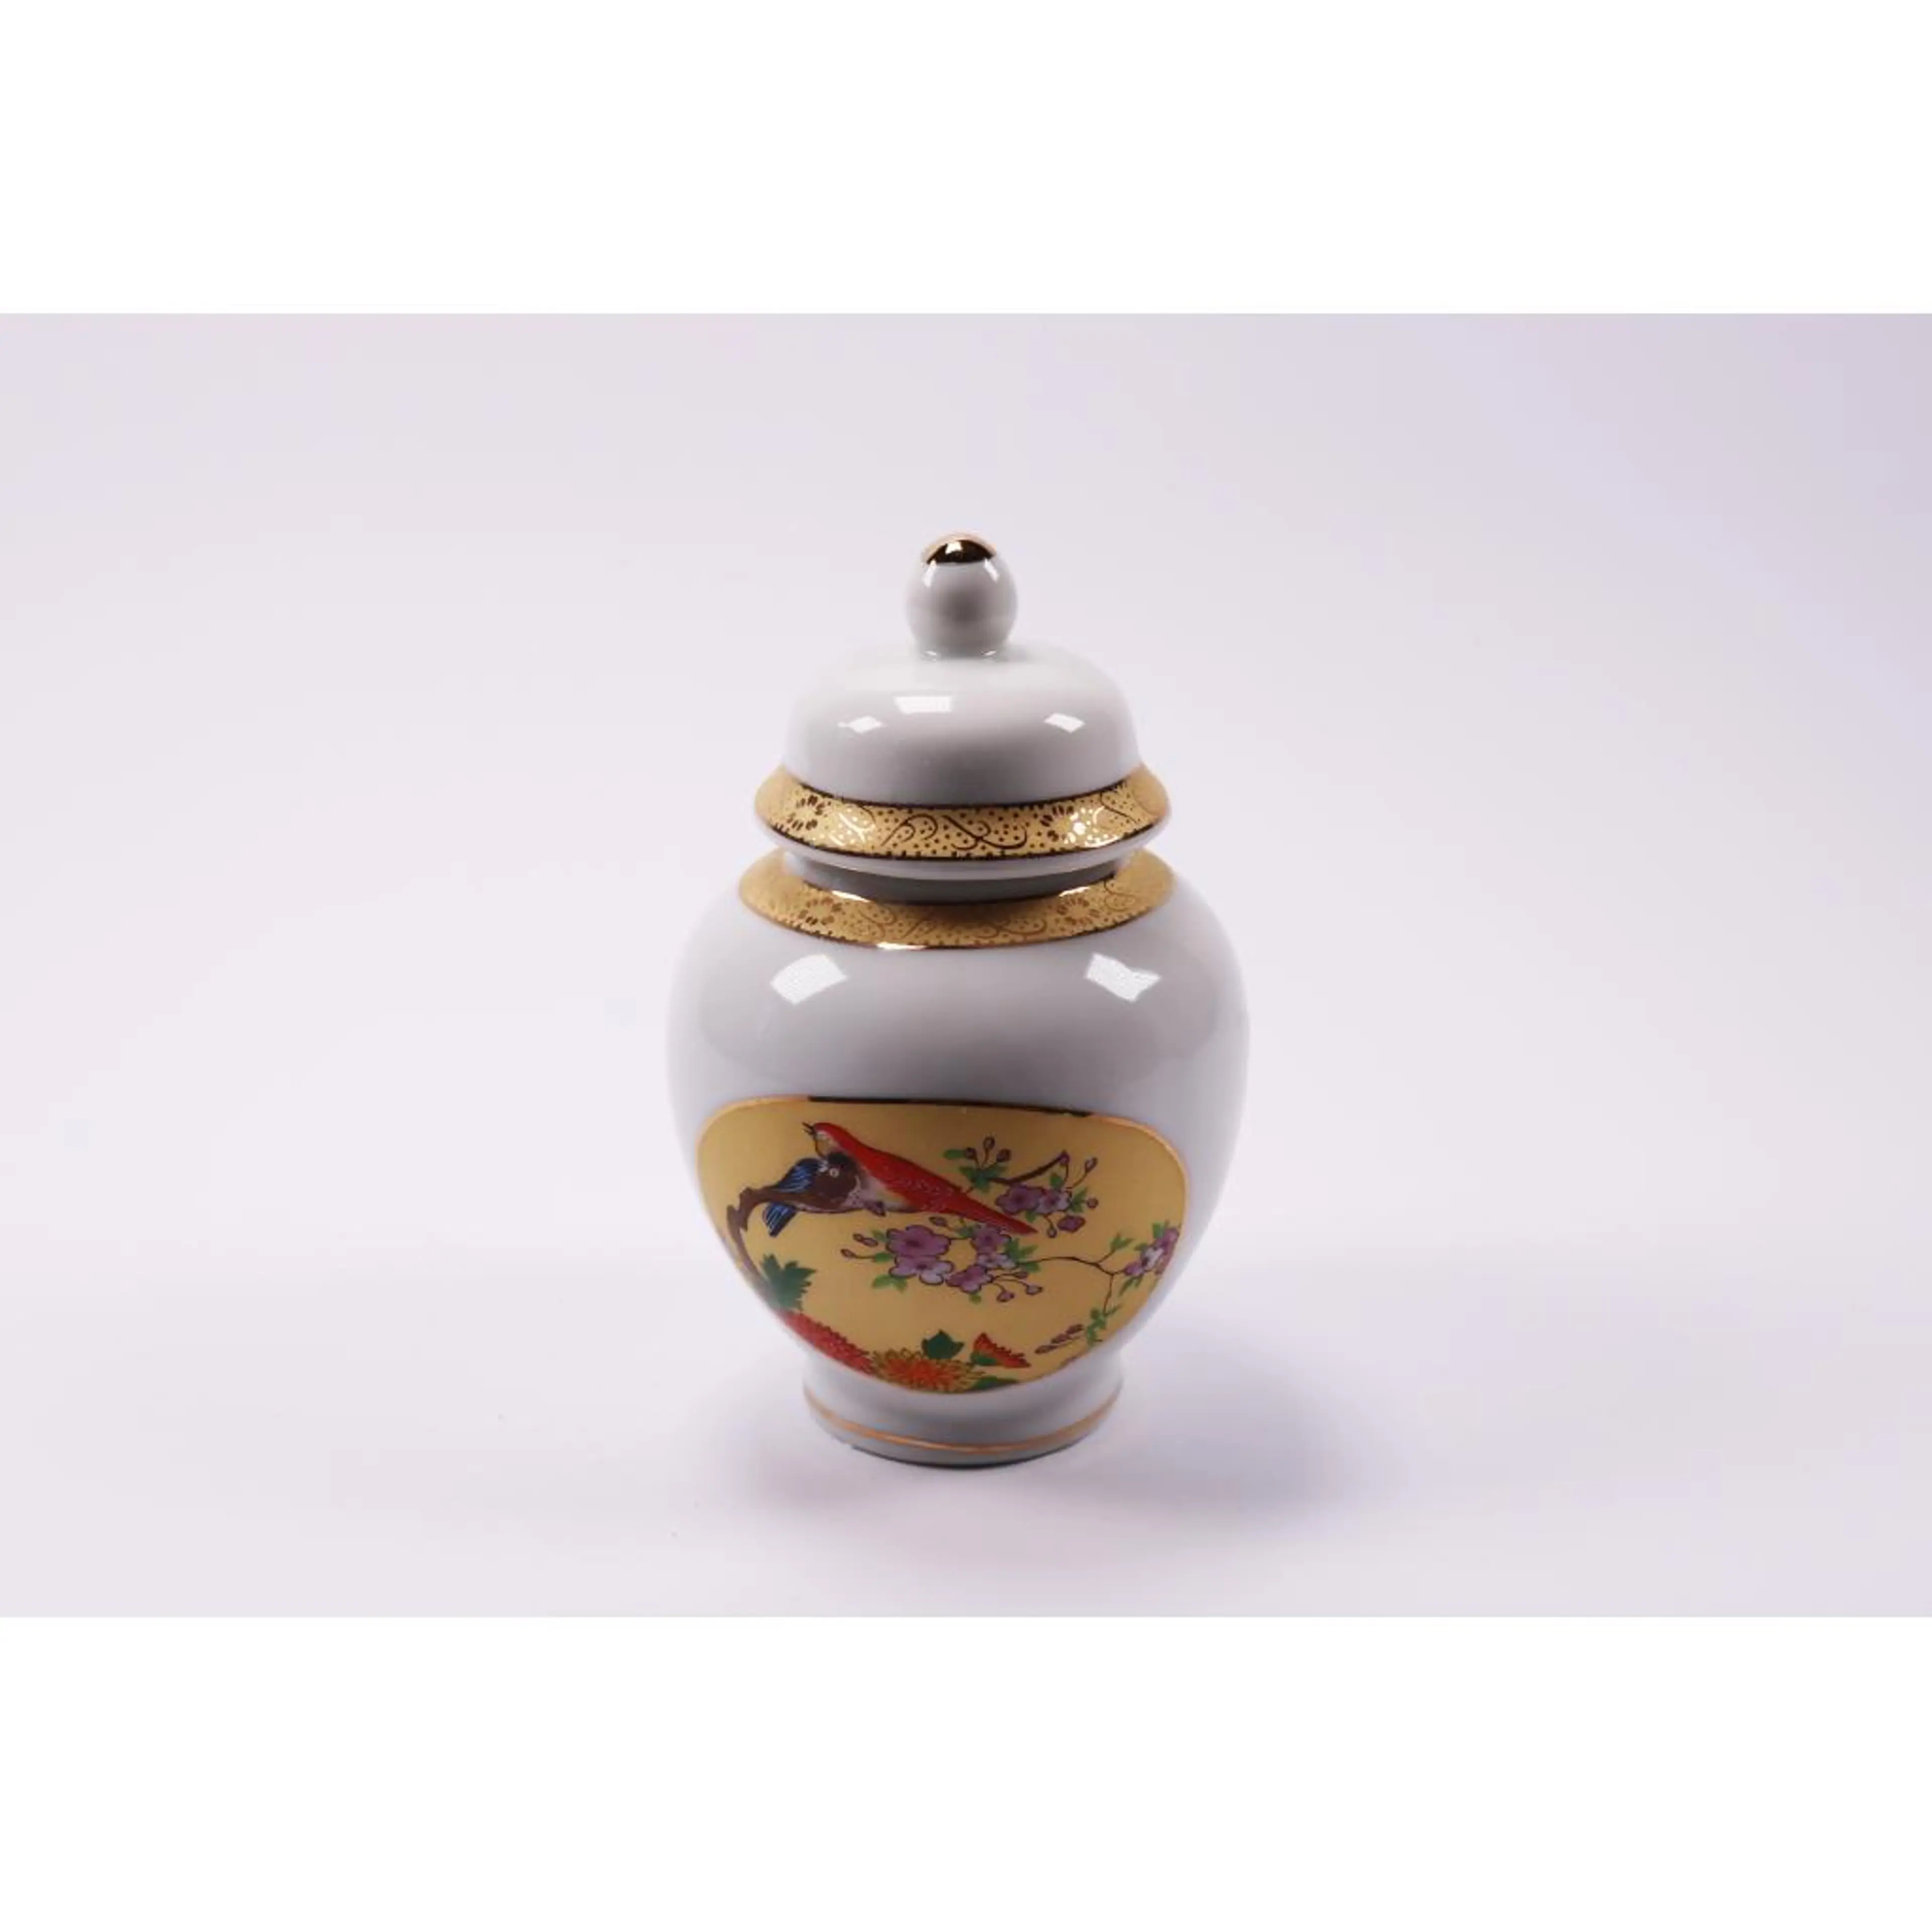 Vintage Ginger Jar With Tropical Birds, Delicate Branches And Gold Details.